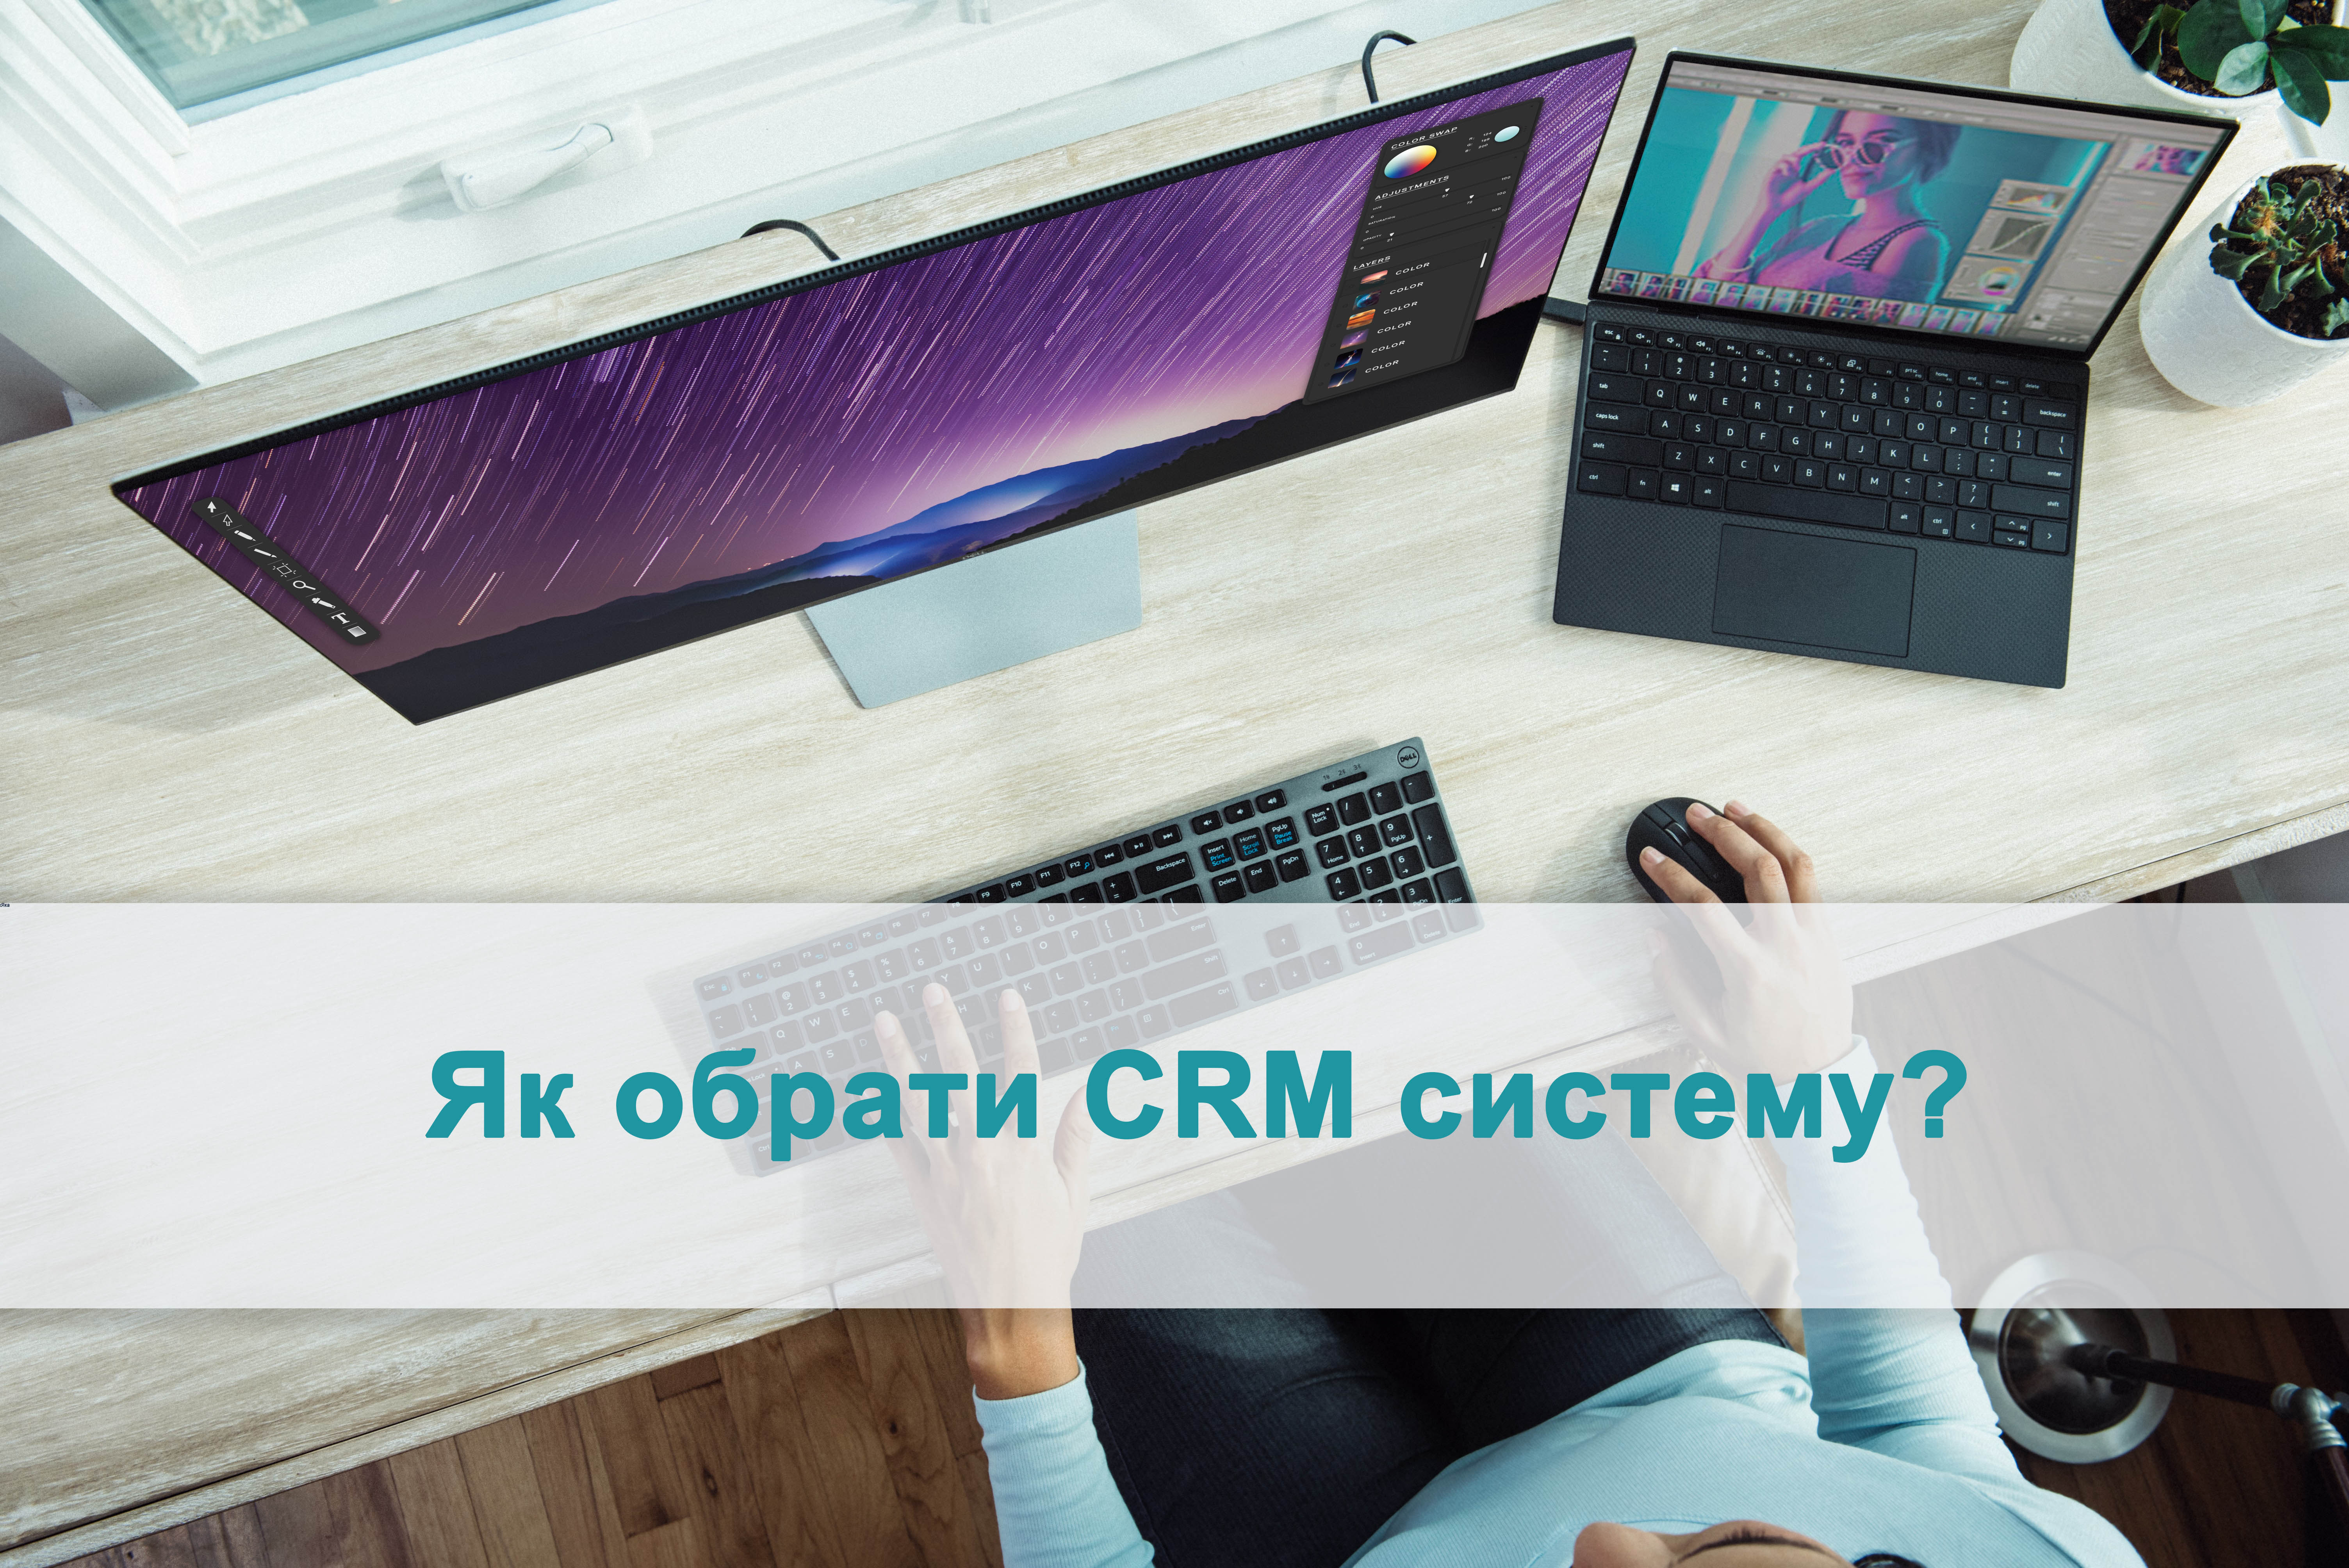 crm for you work